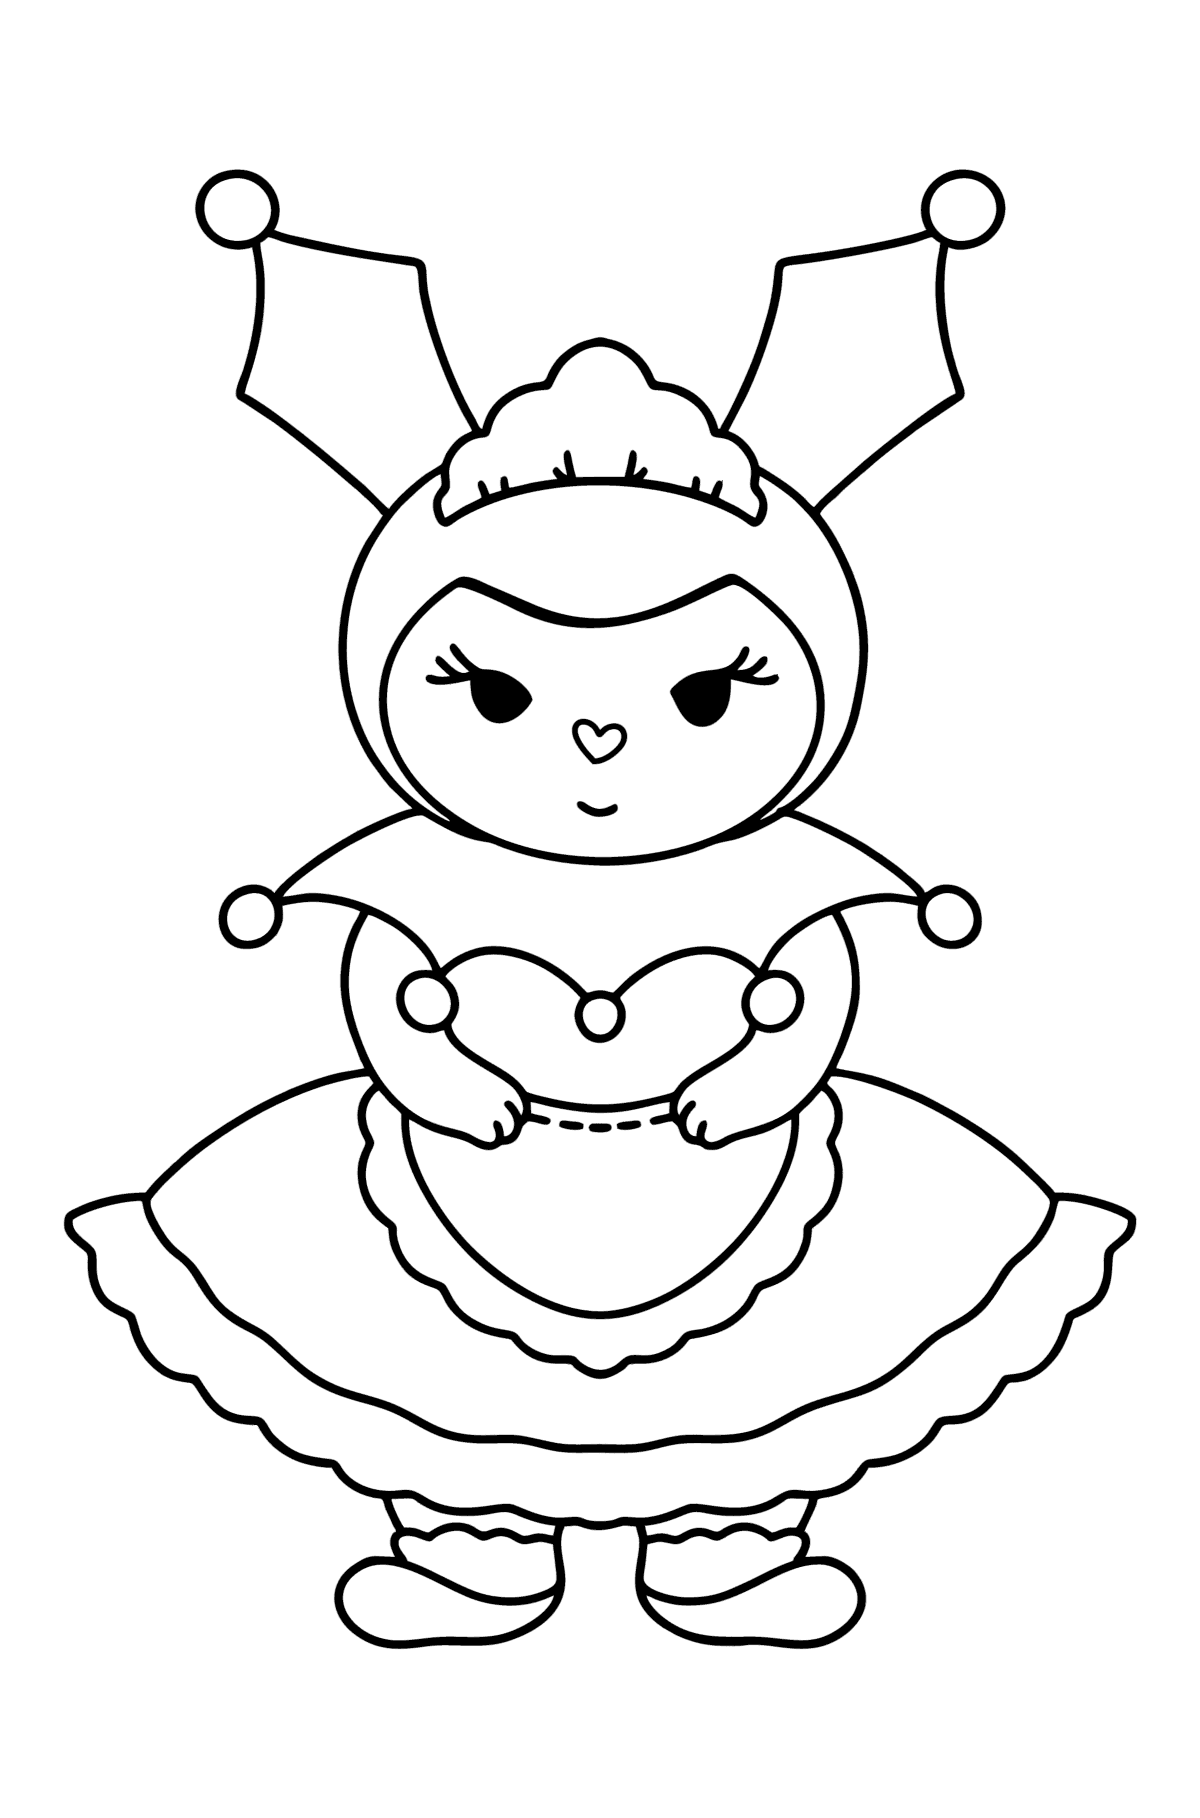 Hello Kitty Kuromy coloring page - Coloring Pages for Kids